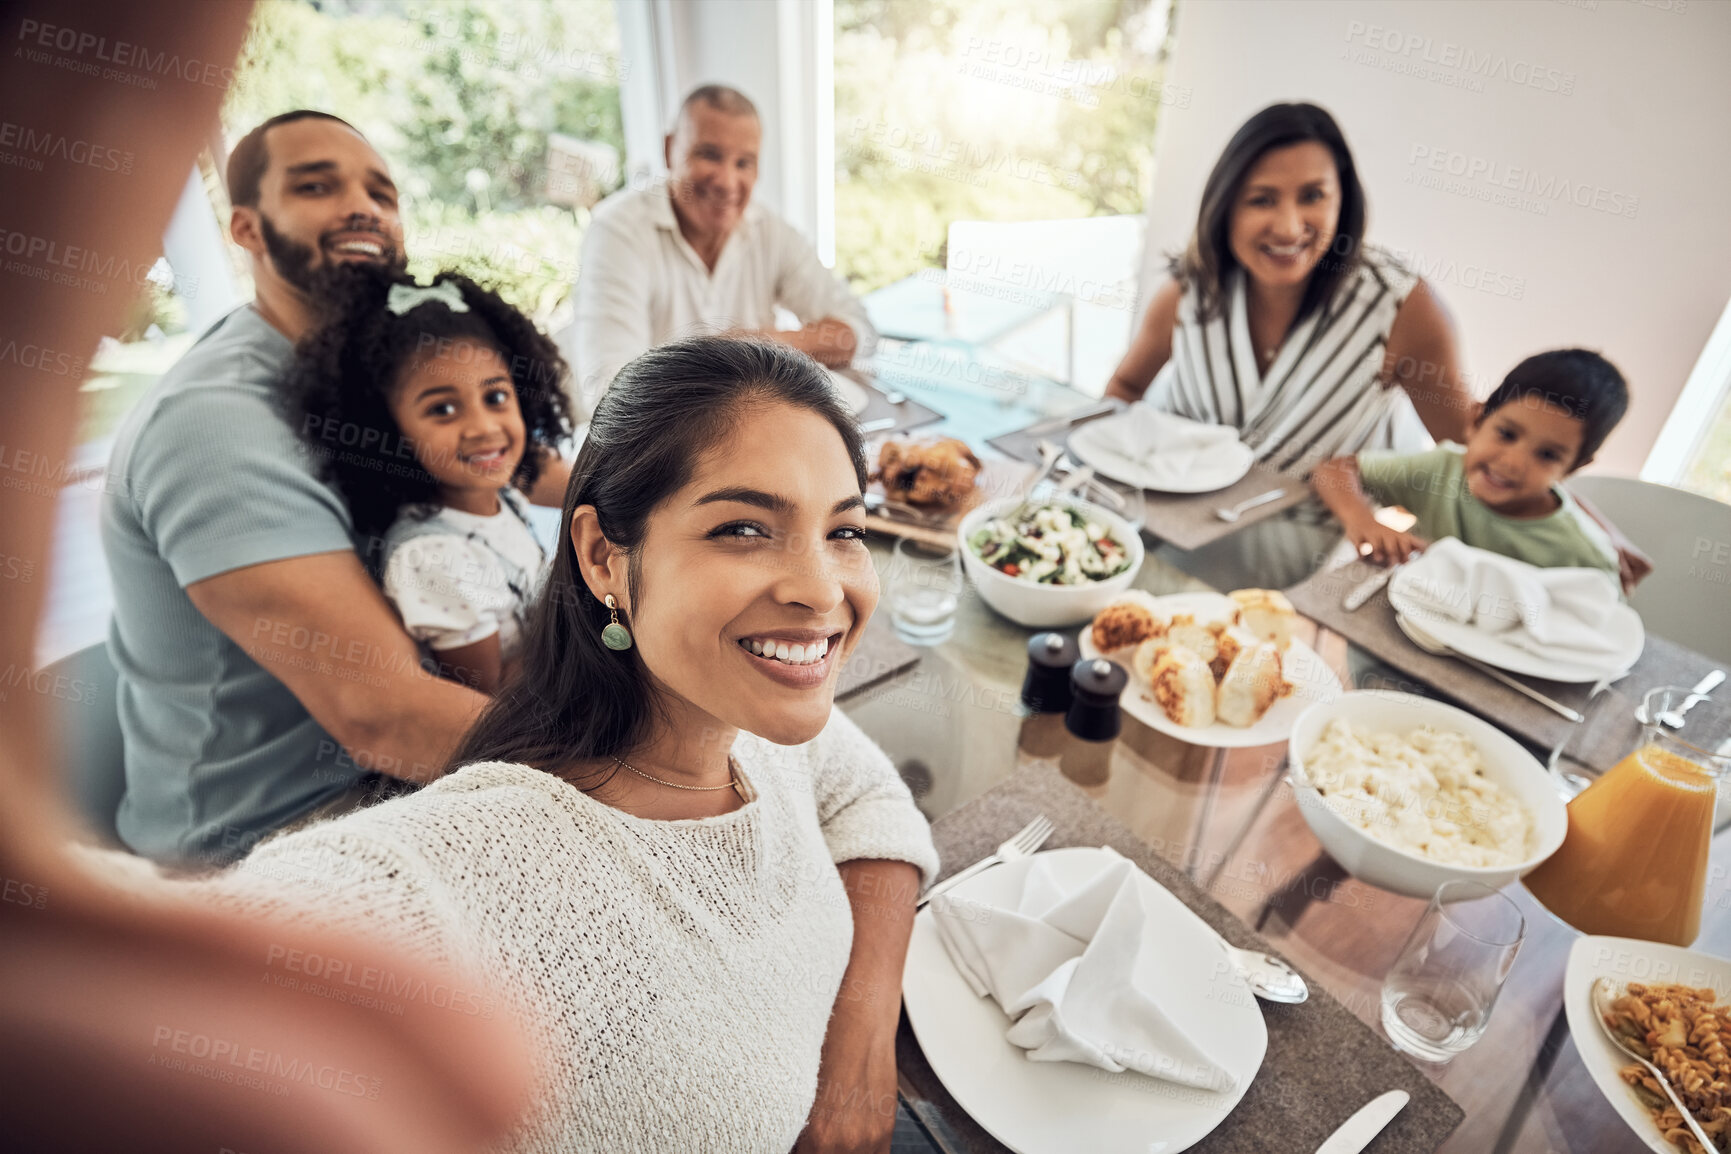 Buy stock photo Big family selfie while eating food or lunch together in their home dining room table with a portrait smile. Happy Puerto Rico parents, mother and father with children for digital holiday memory